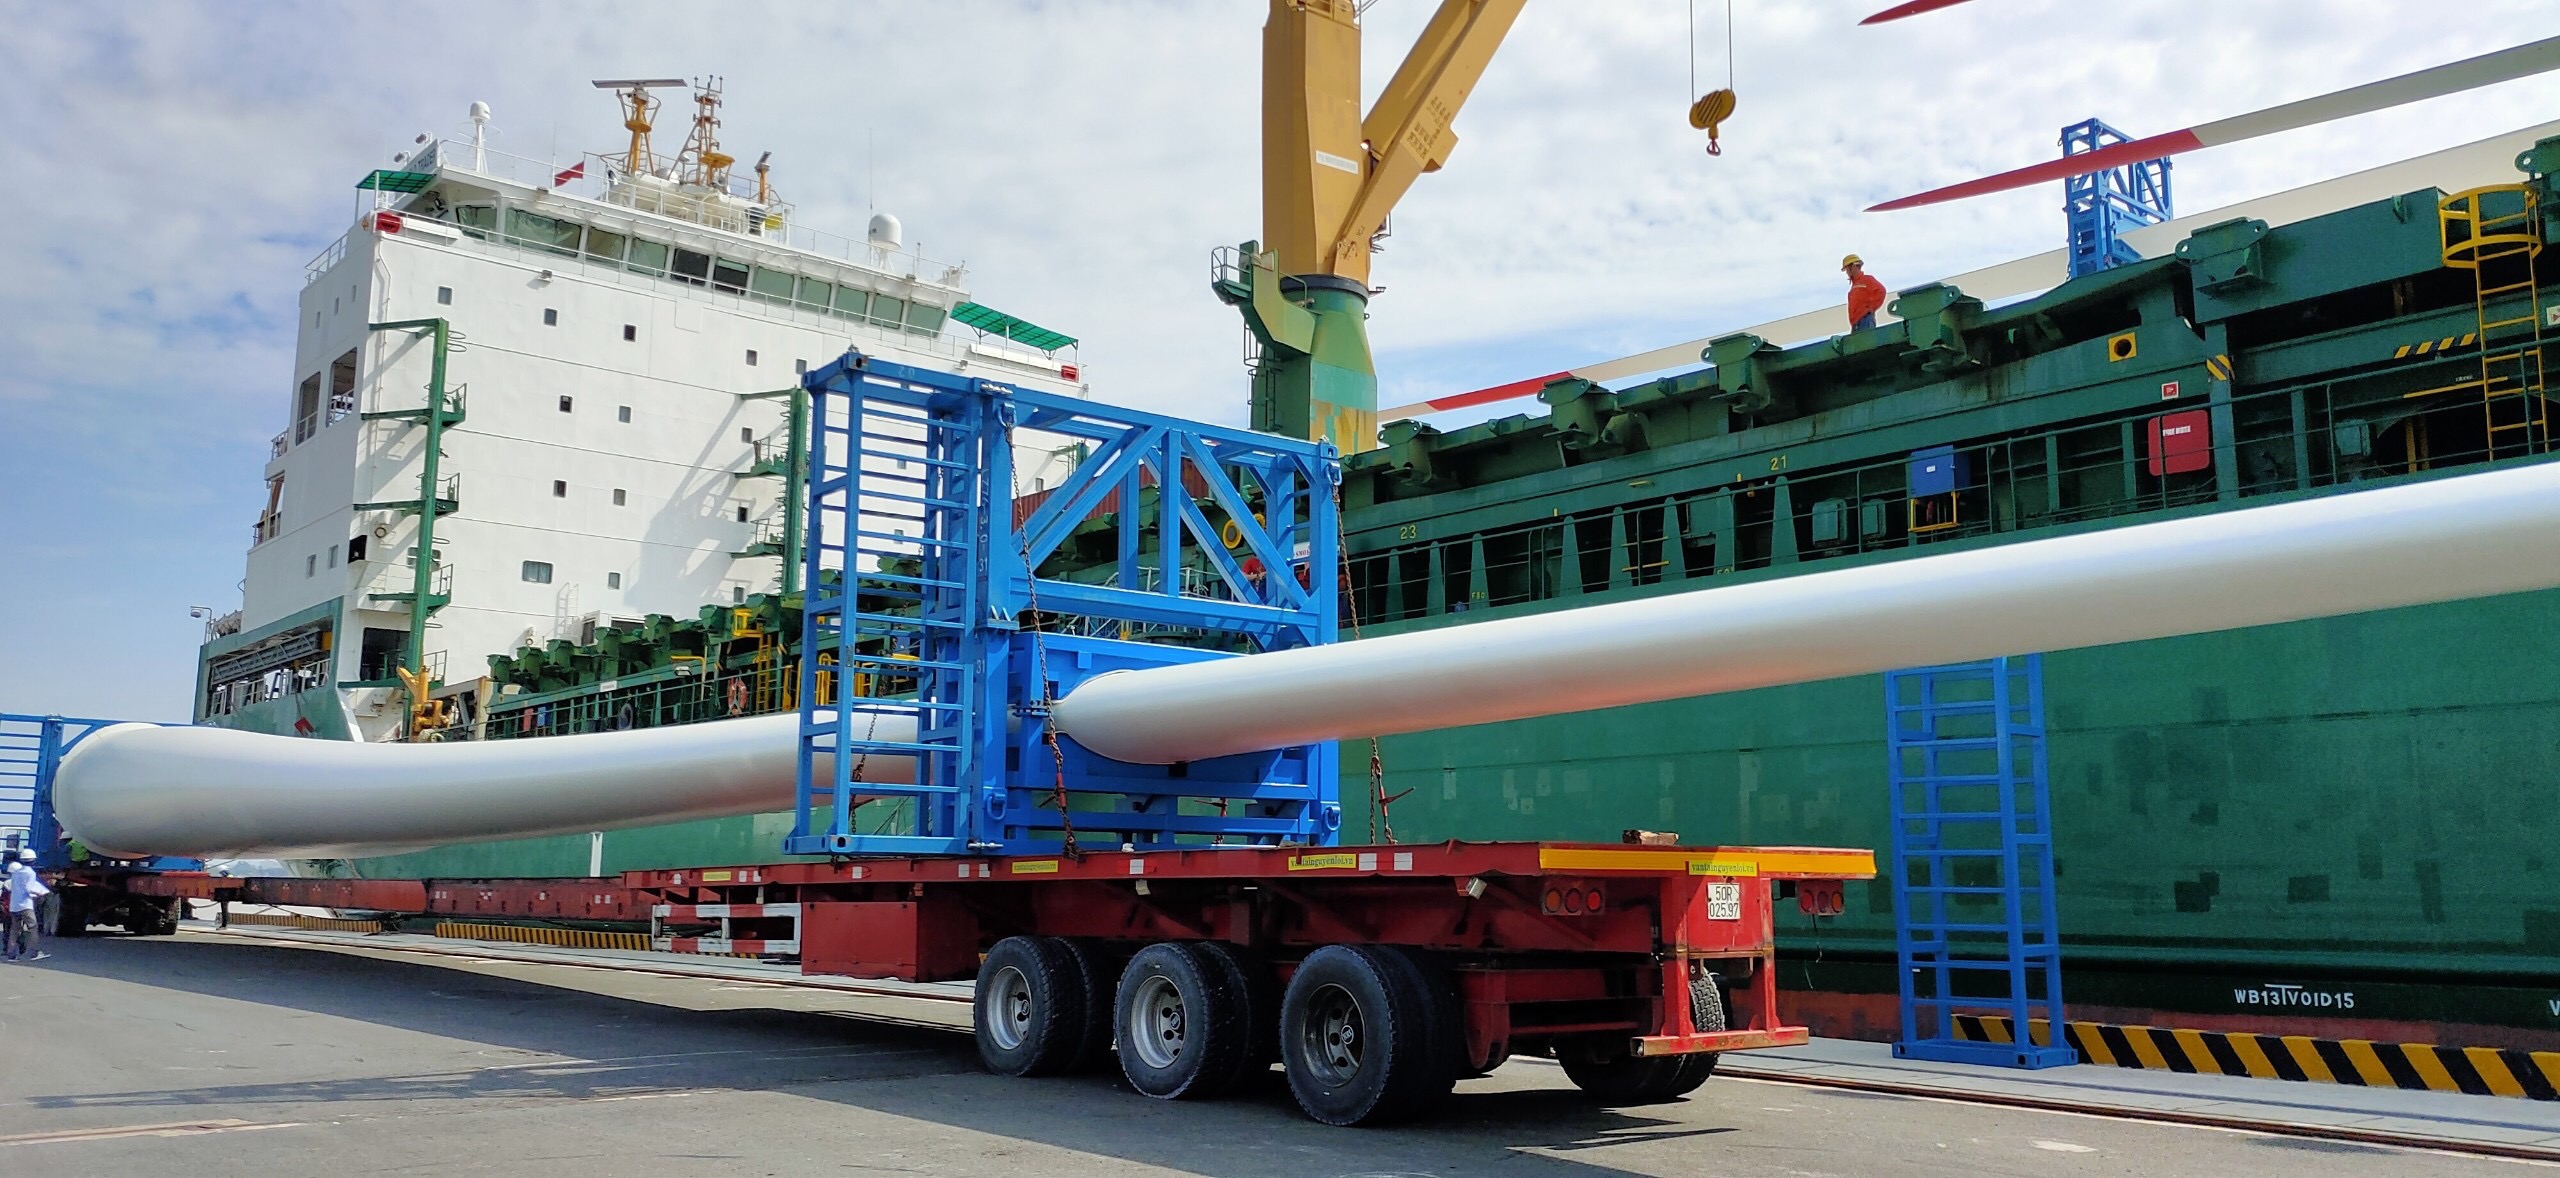 The-80-m-wind-turbine-blades-transportation-move-by-wind-blade-trailer